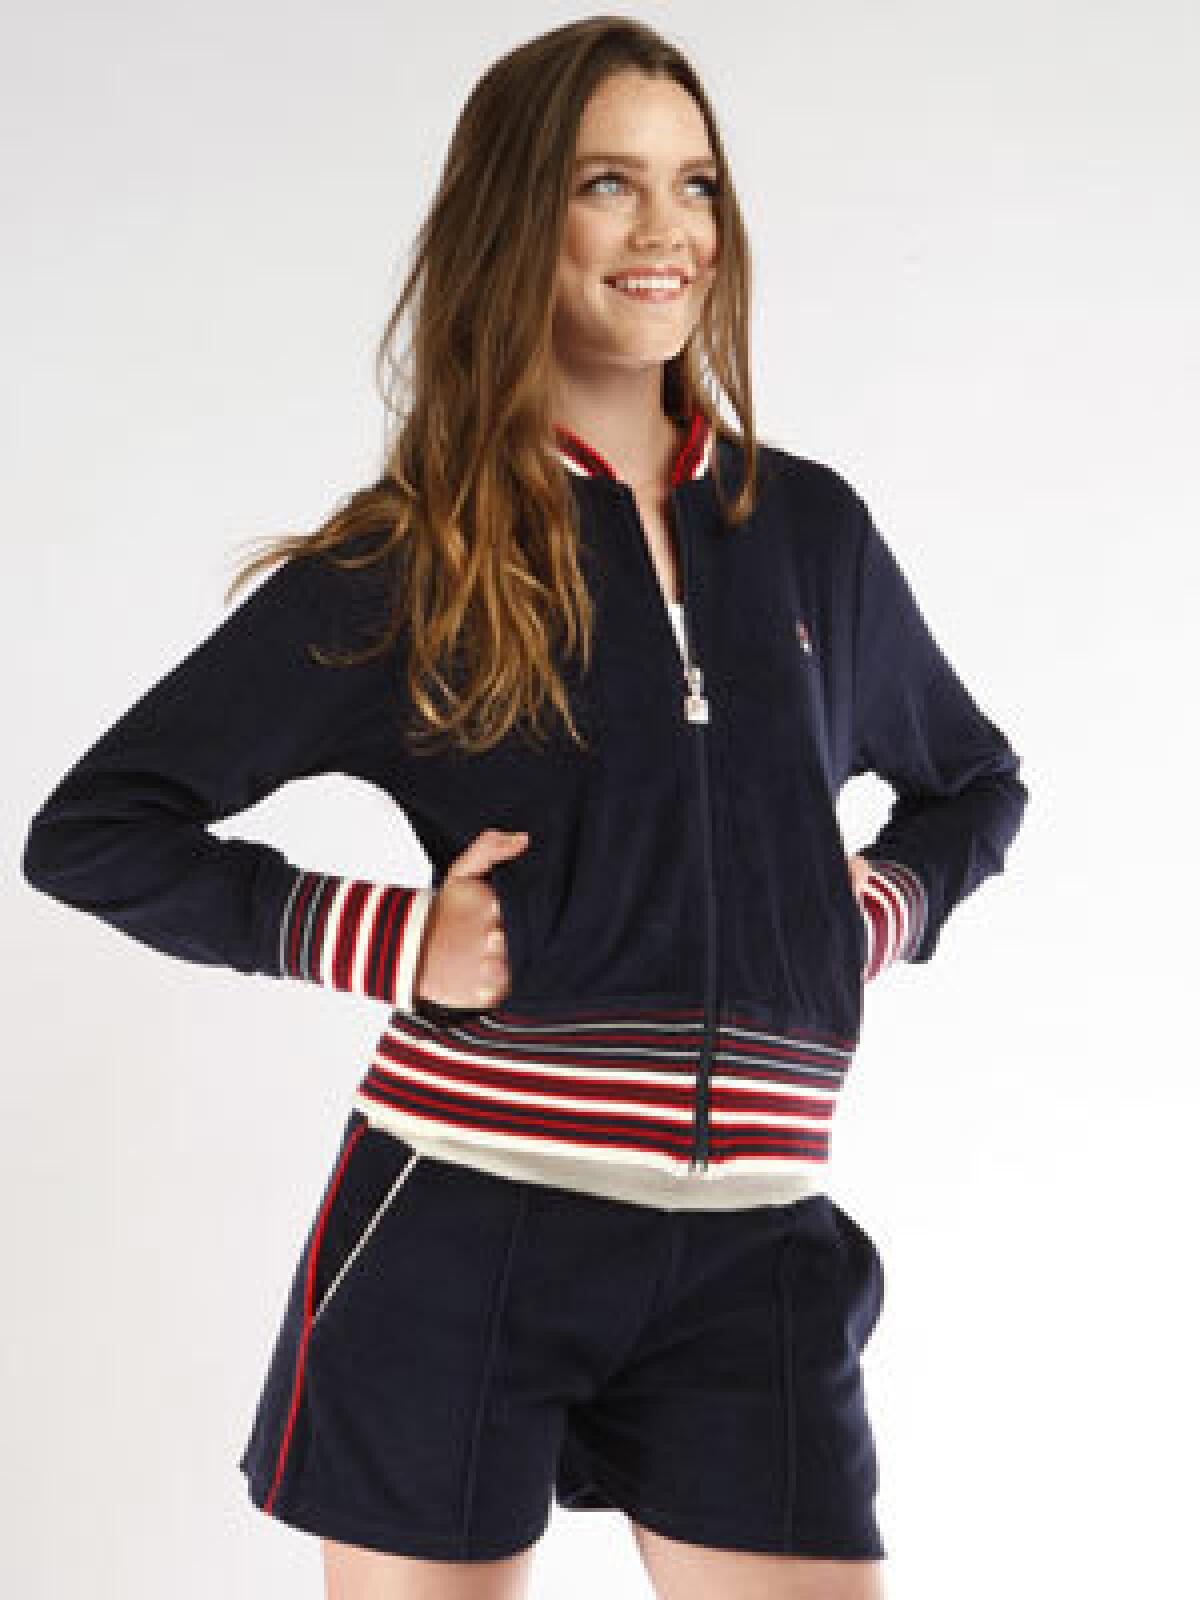 Terry warmup jacket in navy, $90, and short-shorts, $58, with red and white trim.